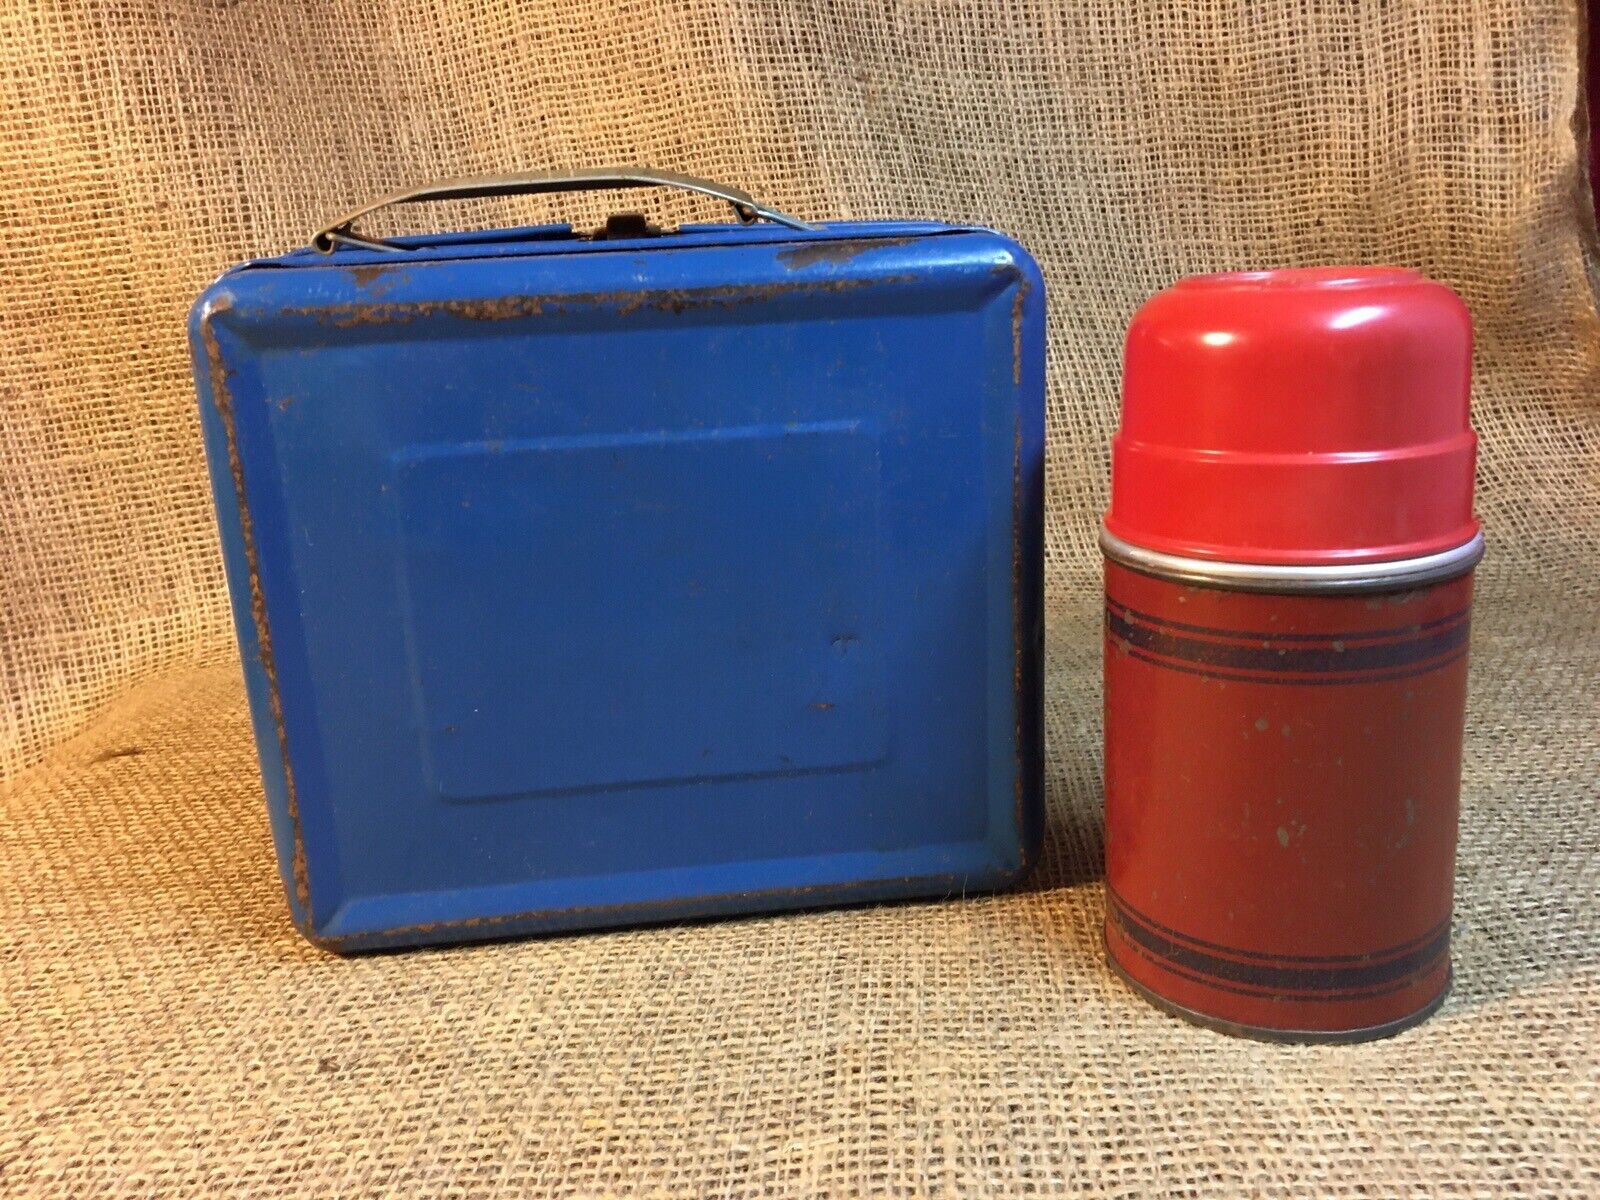 Vintage Child’s Blue Metal Lunchbox and Thermos with Wooden Cork